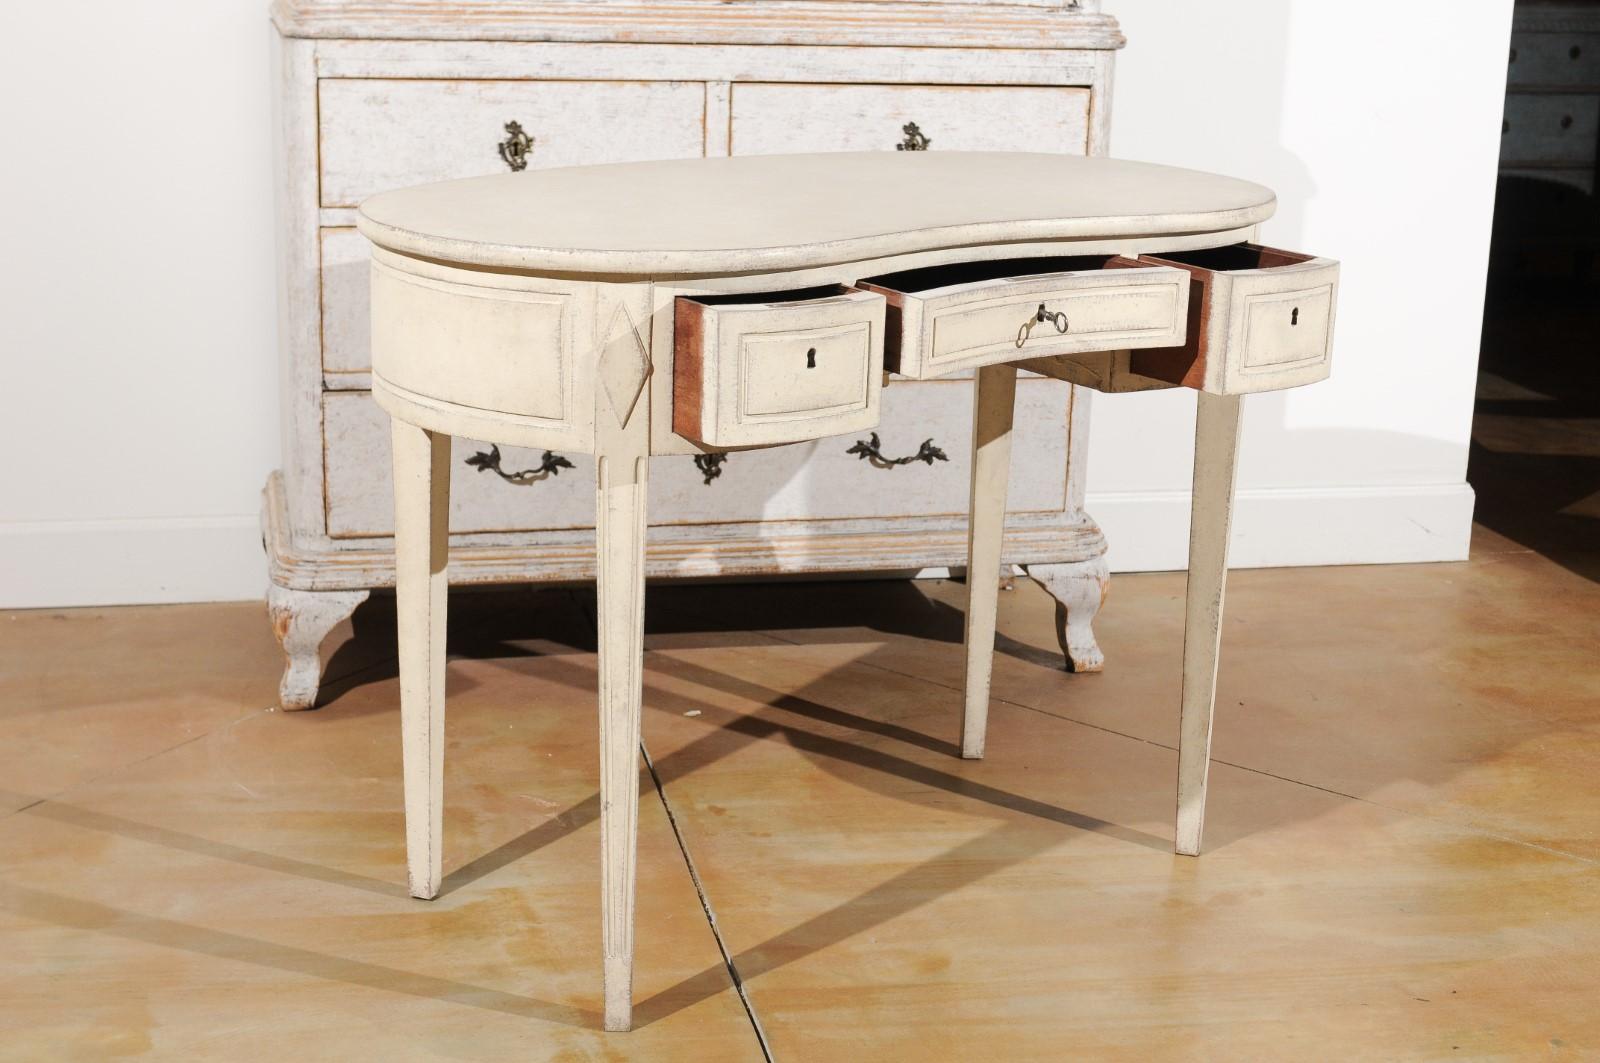 A Scandinavian Gustavian style painted wood freestanding dressing table from the 19th century, with bean-shaped top, three drawers, tapered legs and diamond motifs. Born in Sweden during the 19th century, this painted freestanding dressing table